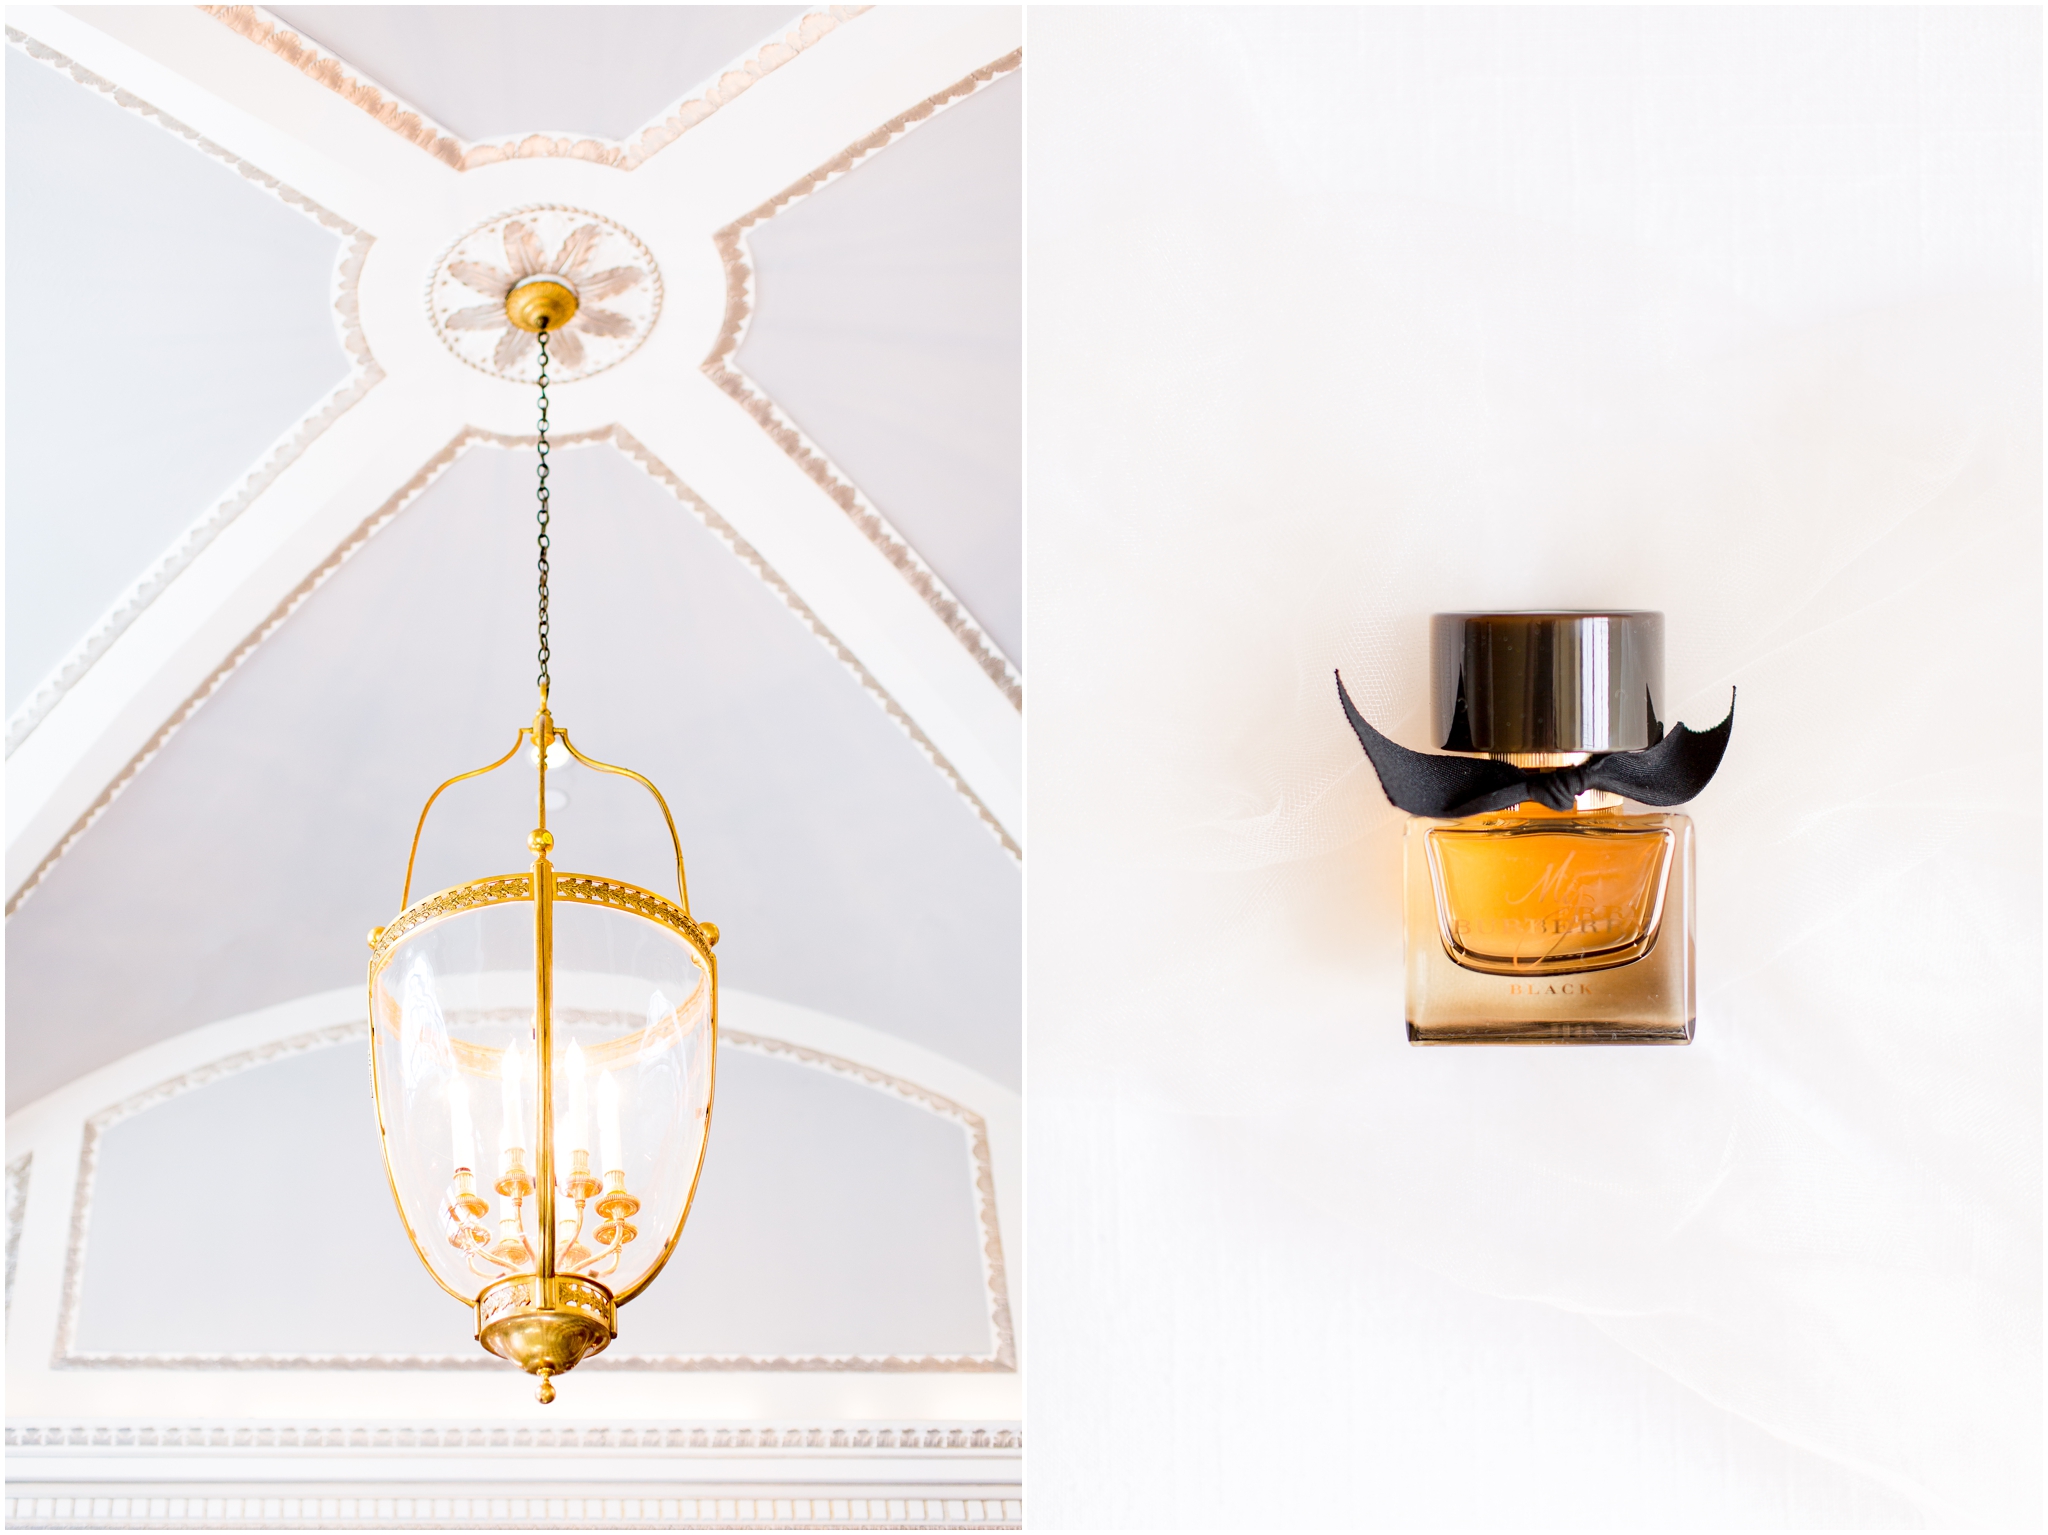 Glamorous gatsby style wedding at the Jefferson Hotel DC was captured by DC wedding photographer Taylor Rose Photography. Includes gold My Burberry perfume.